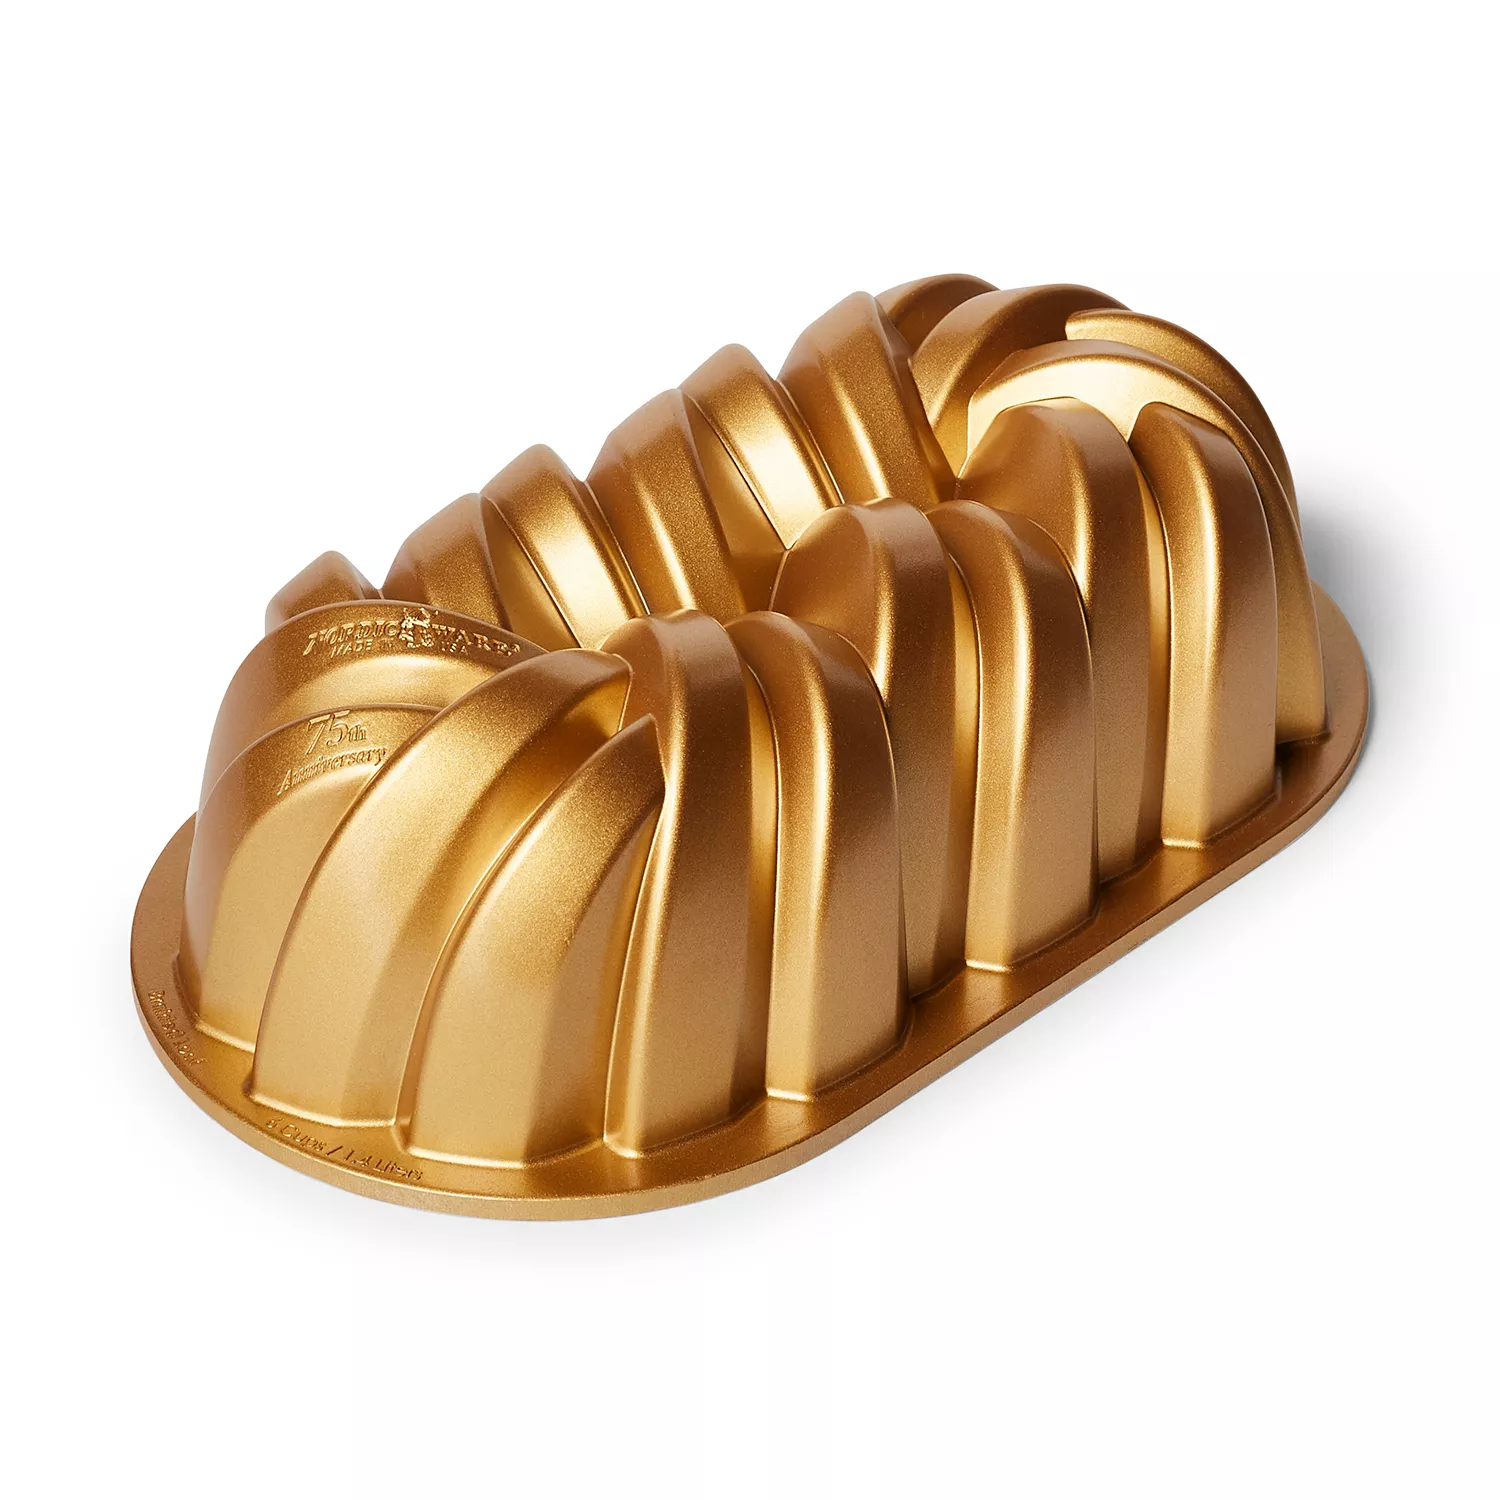 Classic Fluted Loaf Pan - Nordic Ware